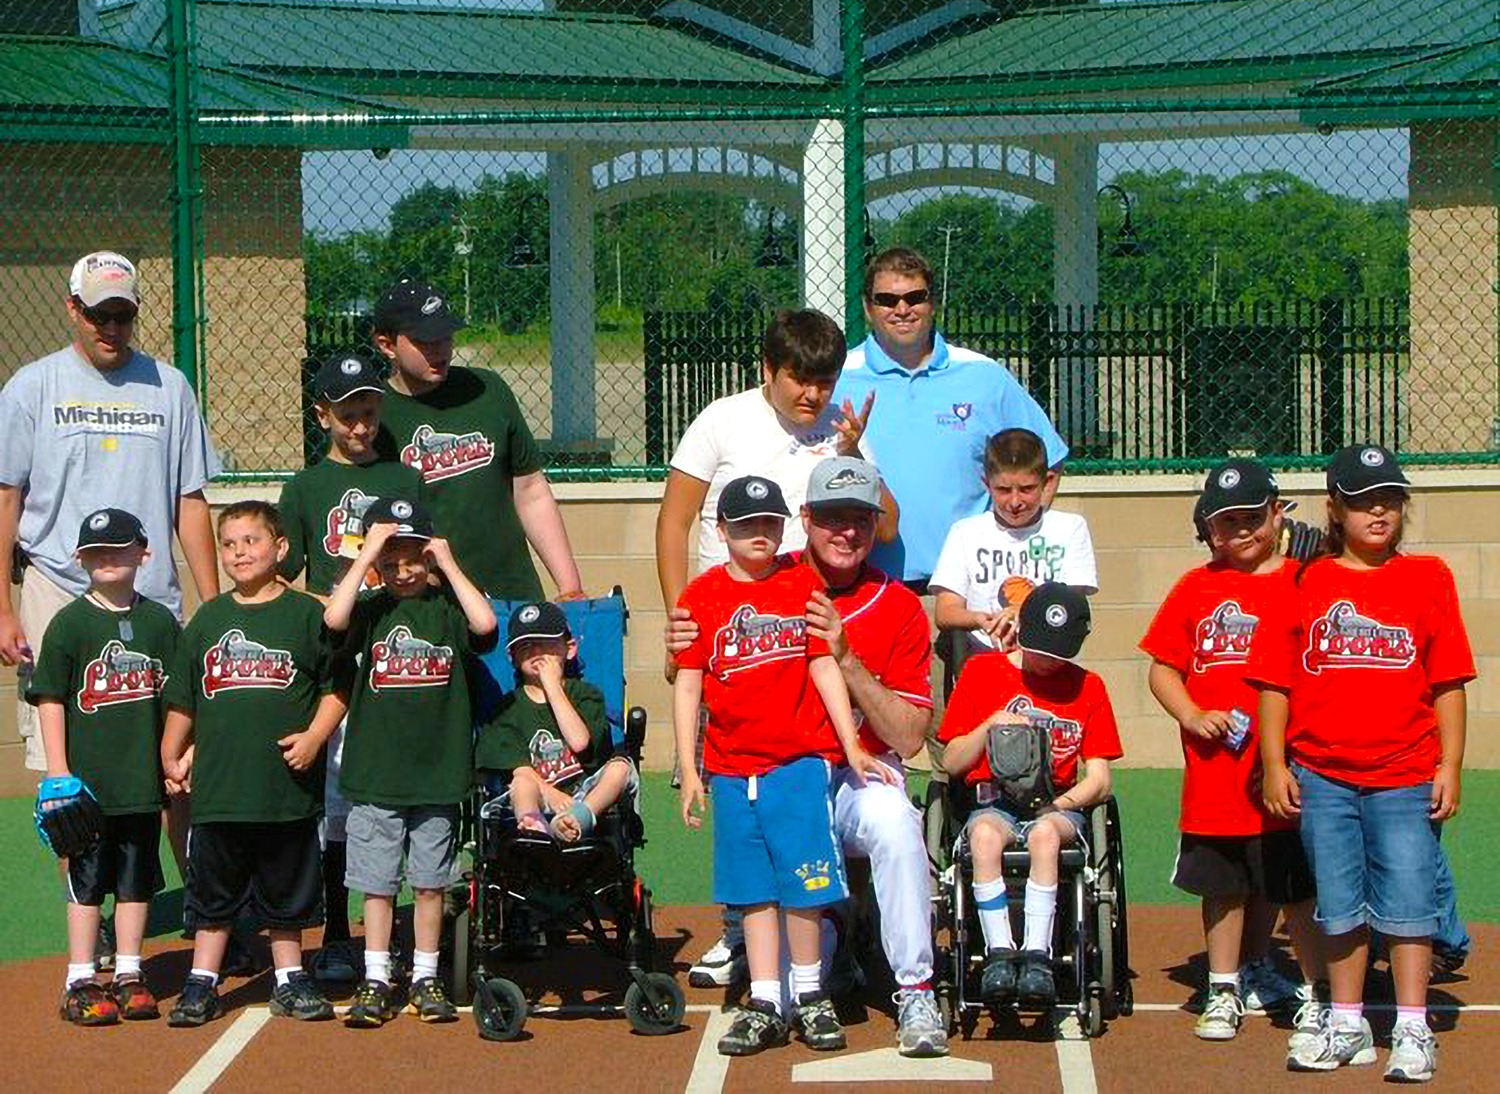 Midland Miracle Field Baseball Event with teams posing for photo wearing Great Lakes Loons shirts as jerseys.